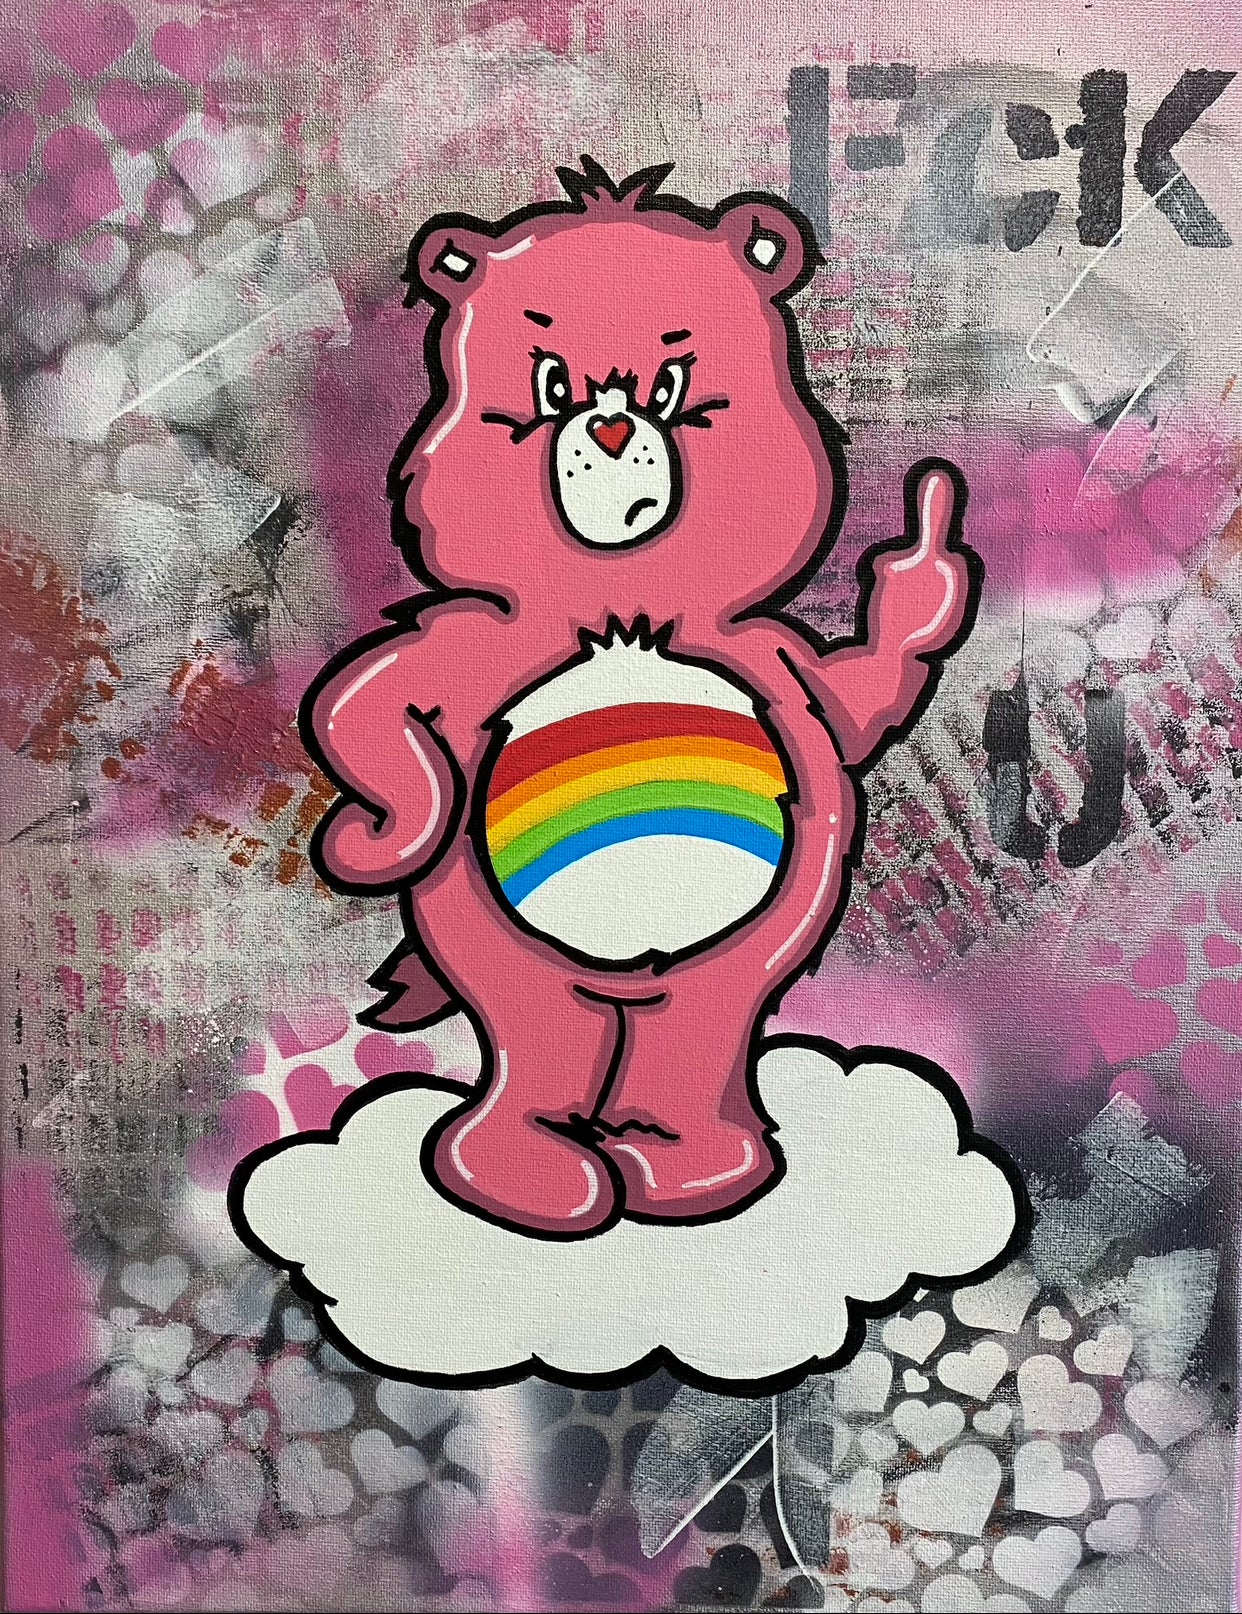 ‘Don’t give a Care’ Carebears limited edition